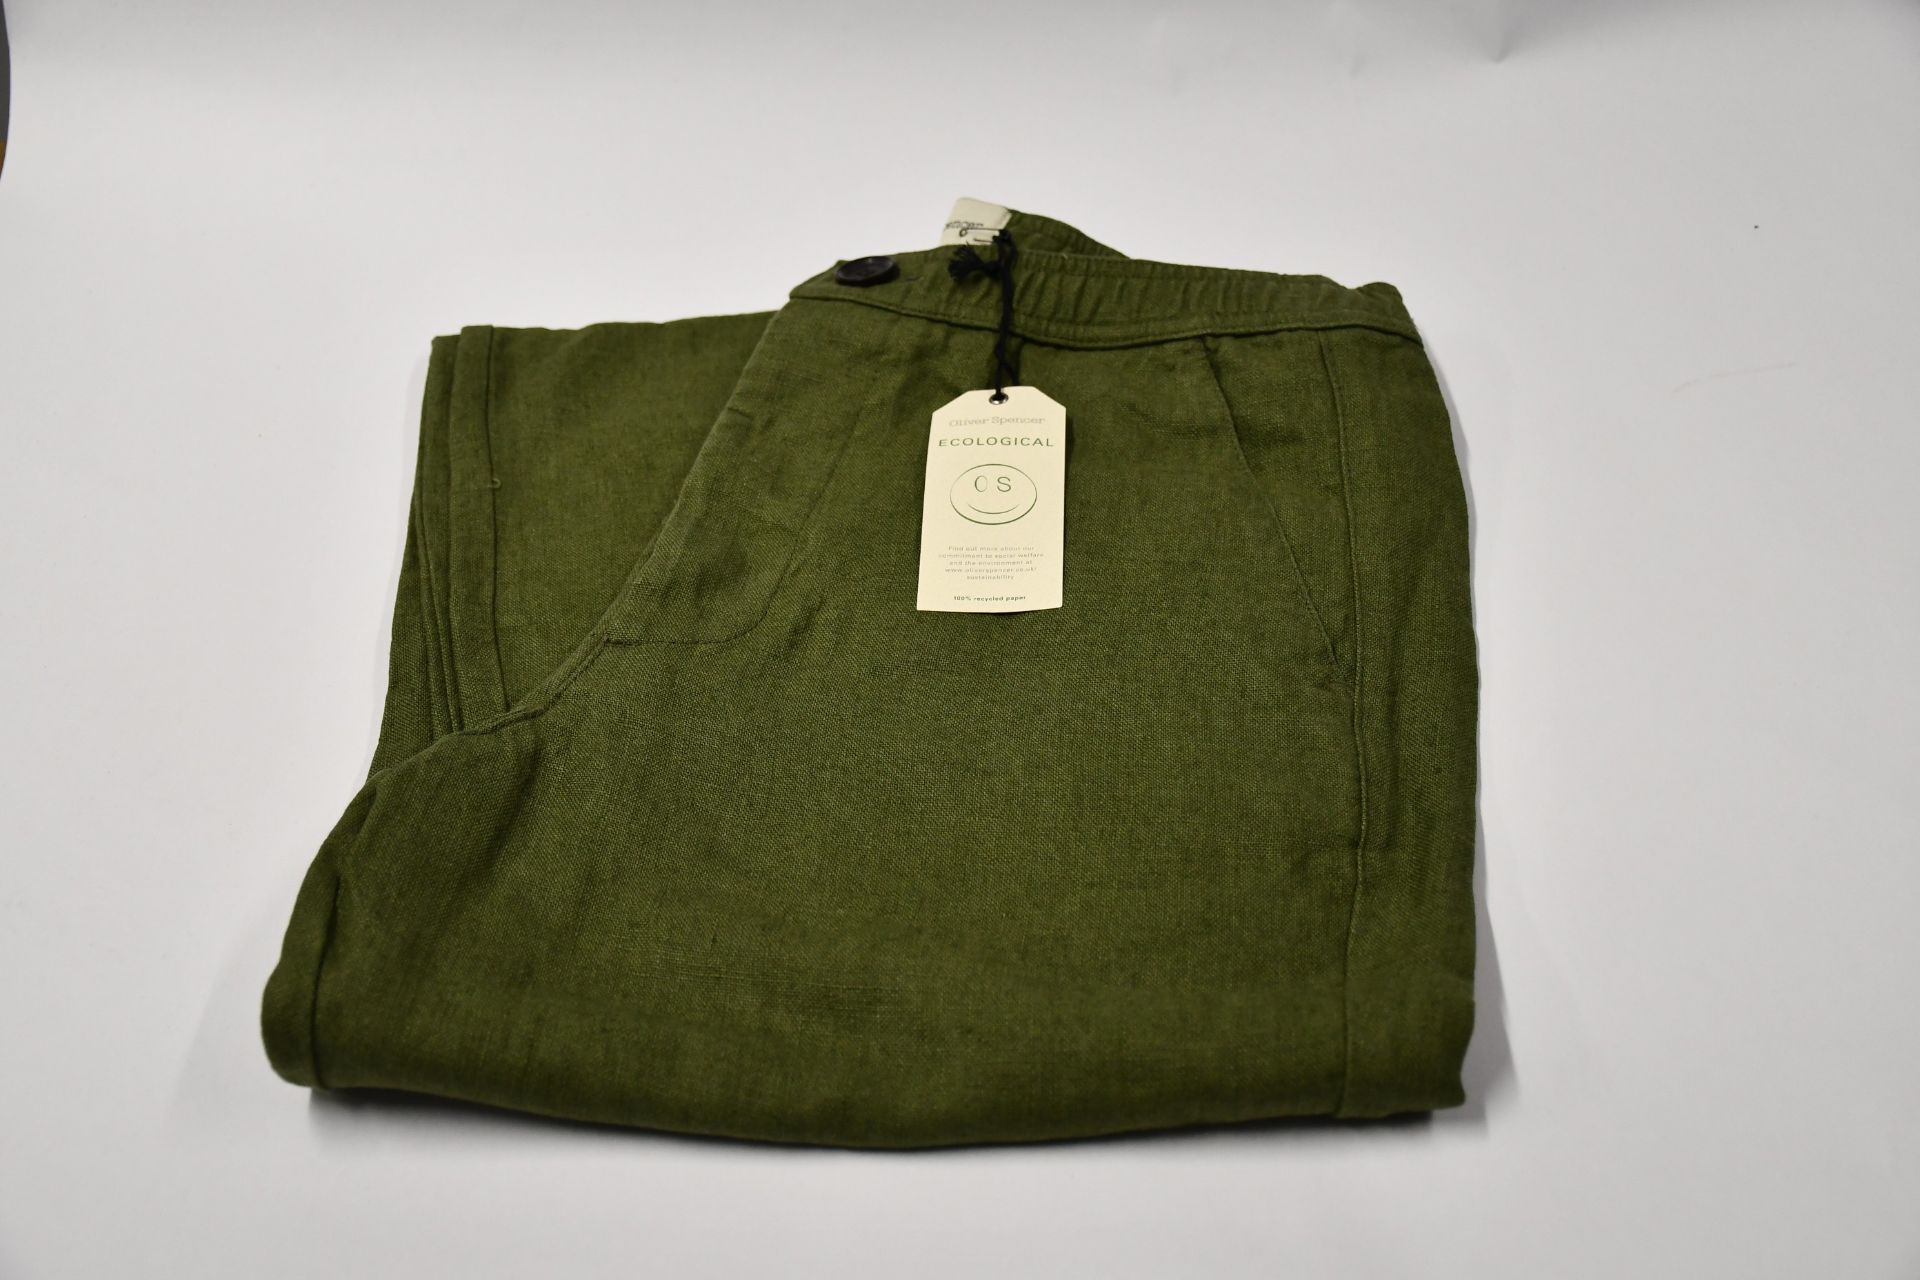 Two pairs of as new Oliver Spencer Ecological Evering drawstring trousers (1 x S, 1 x L).